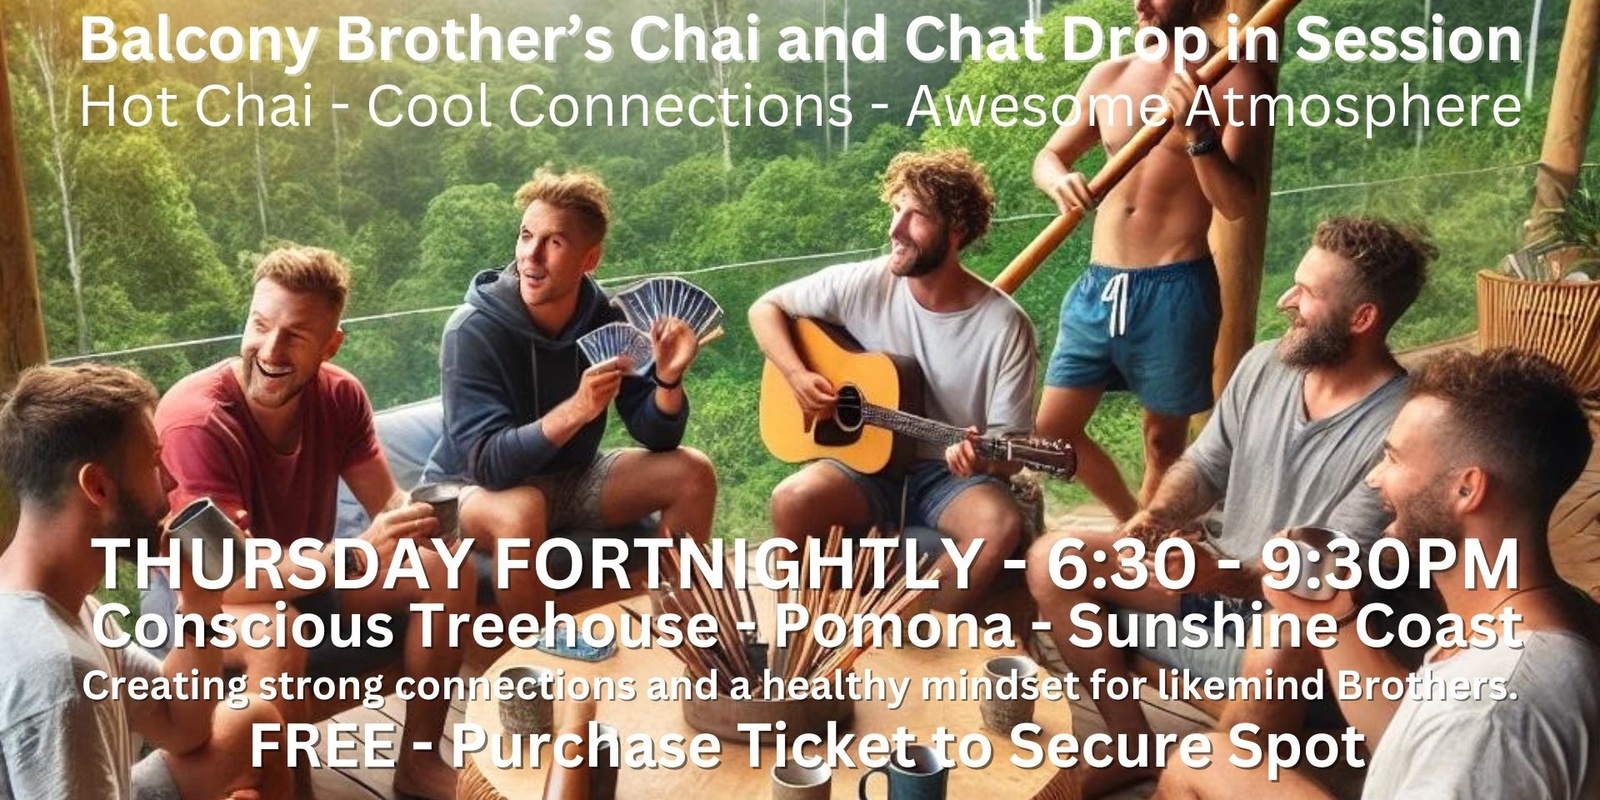 Banner image for Balcony Brothers Chai and Chat Drop in Session